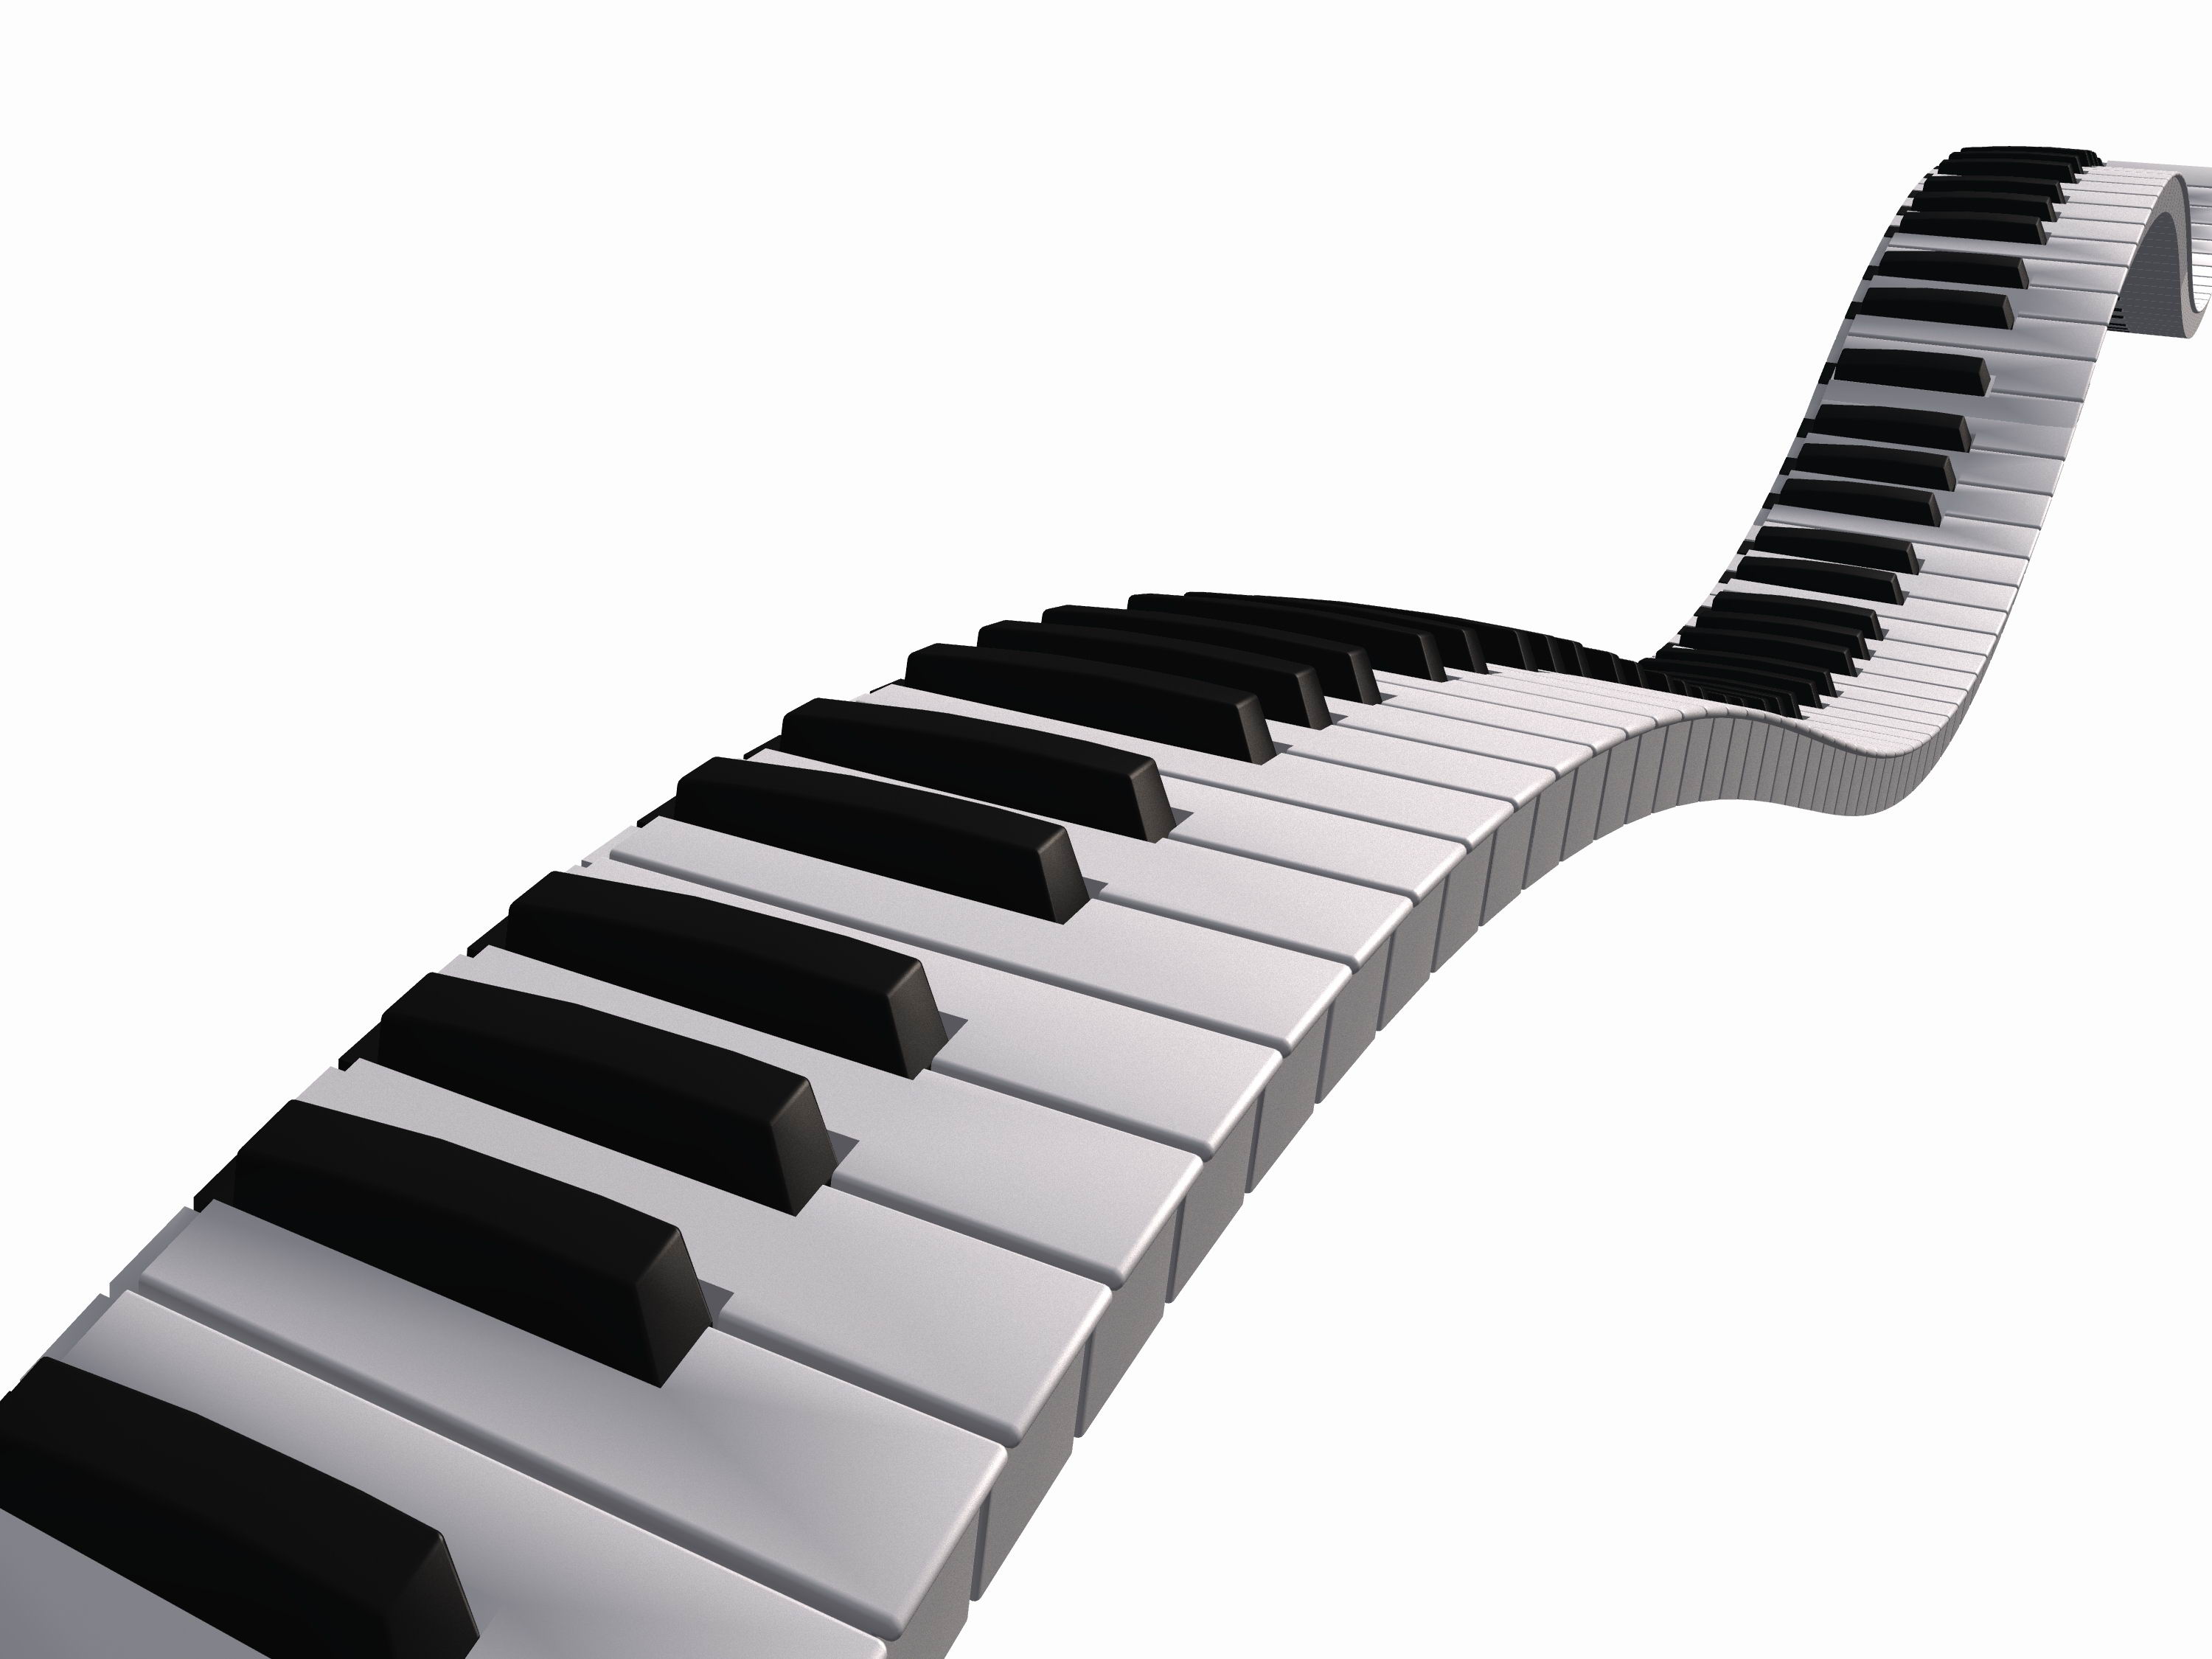 Piano PNG HD Images - 130855